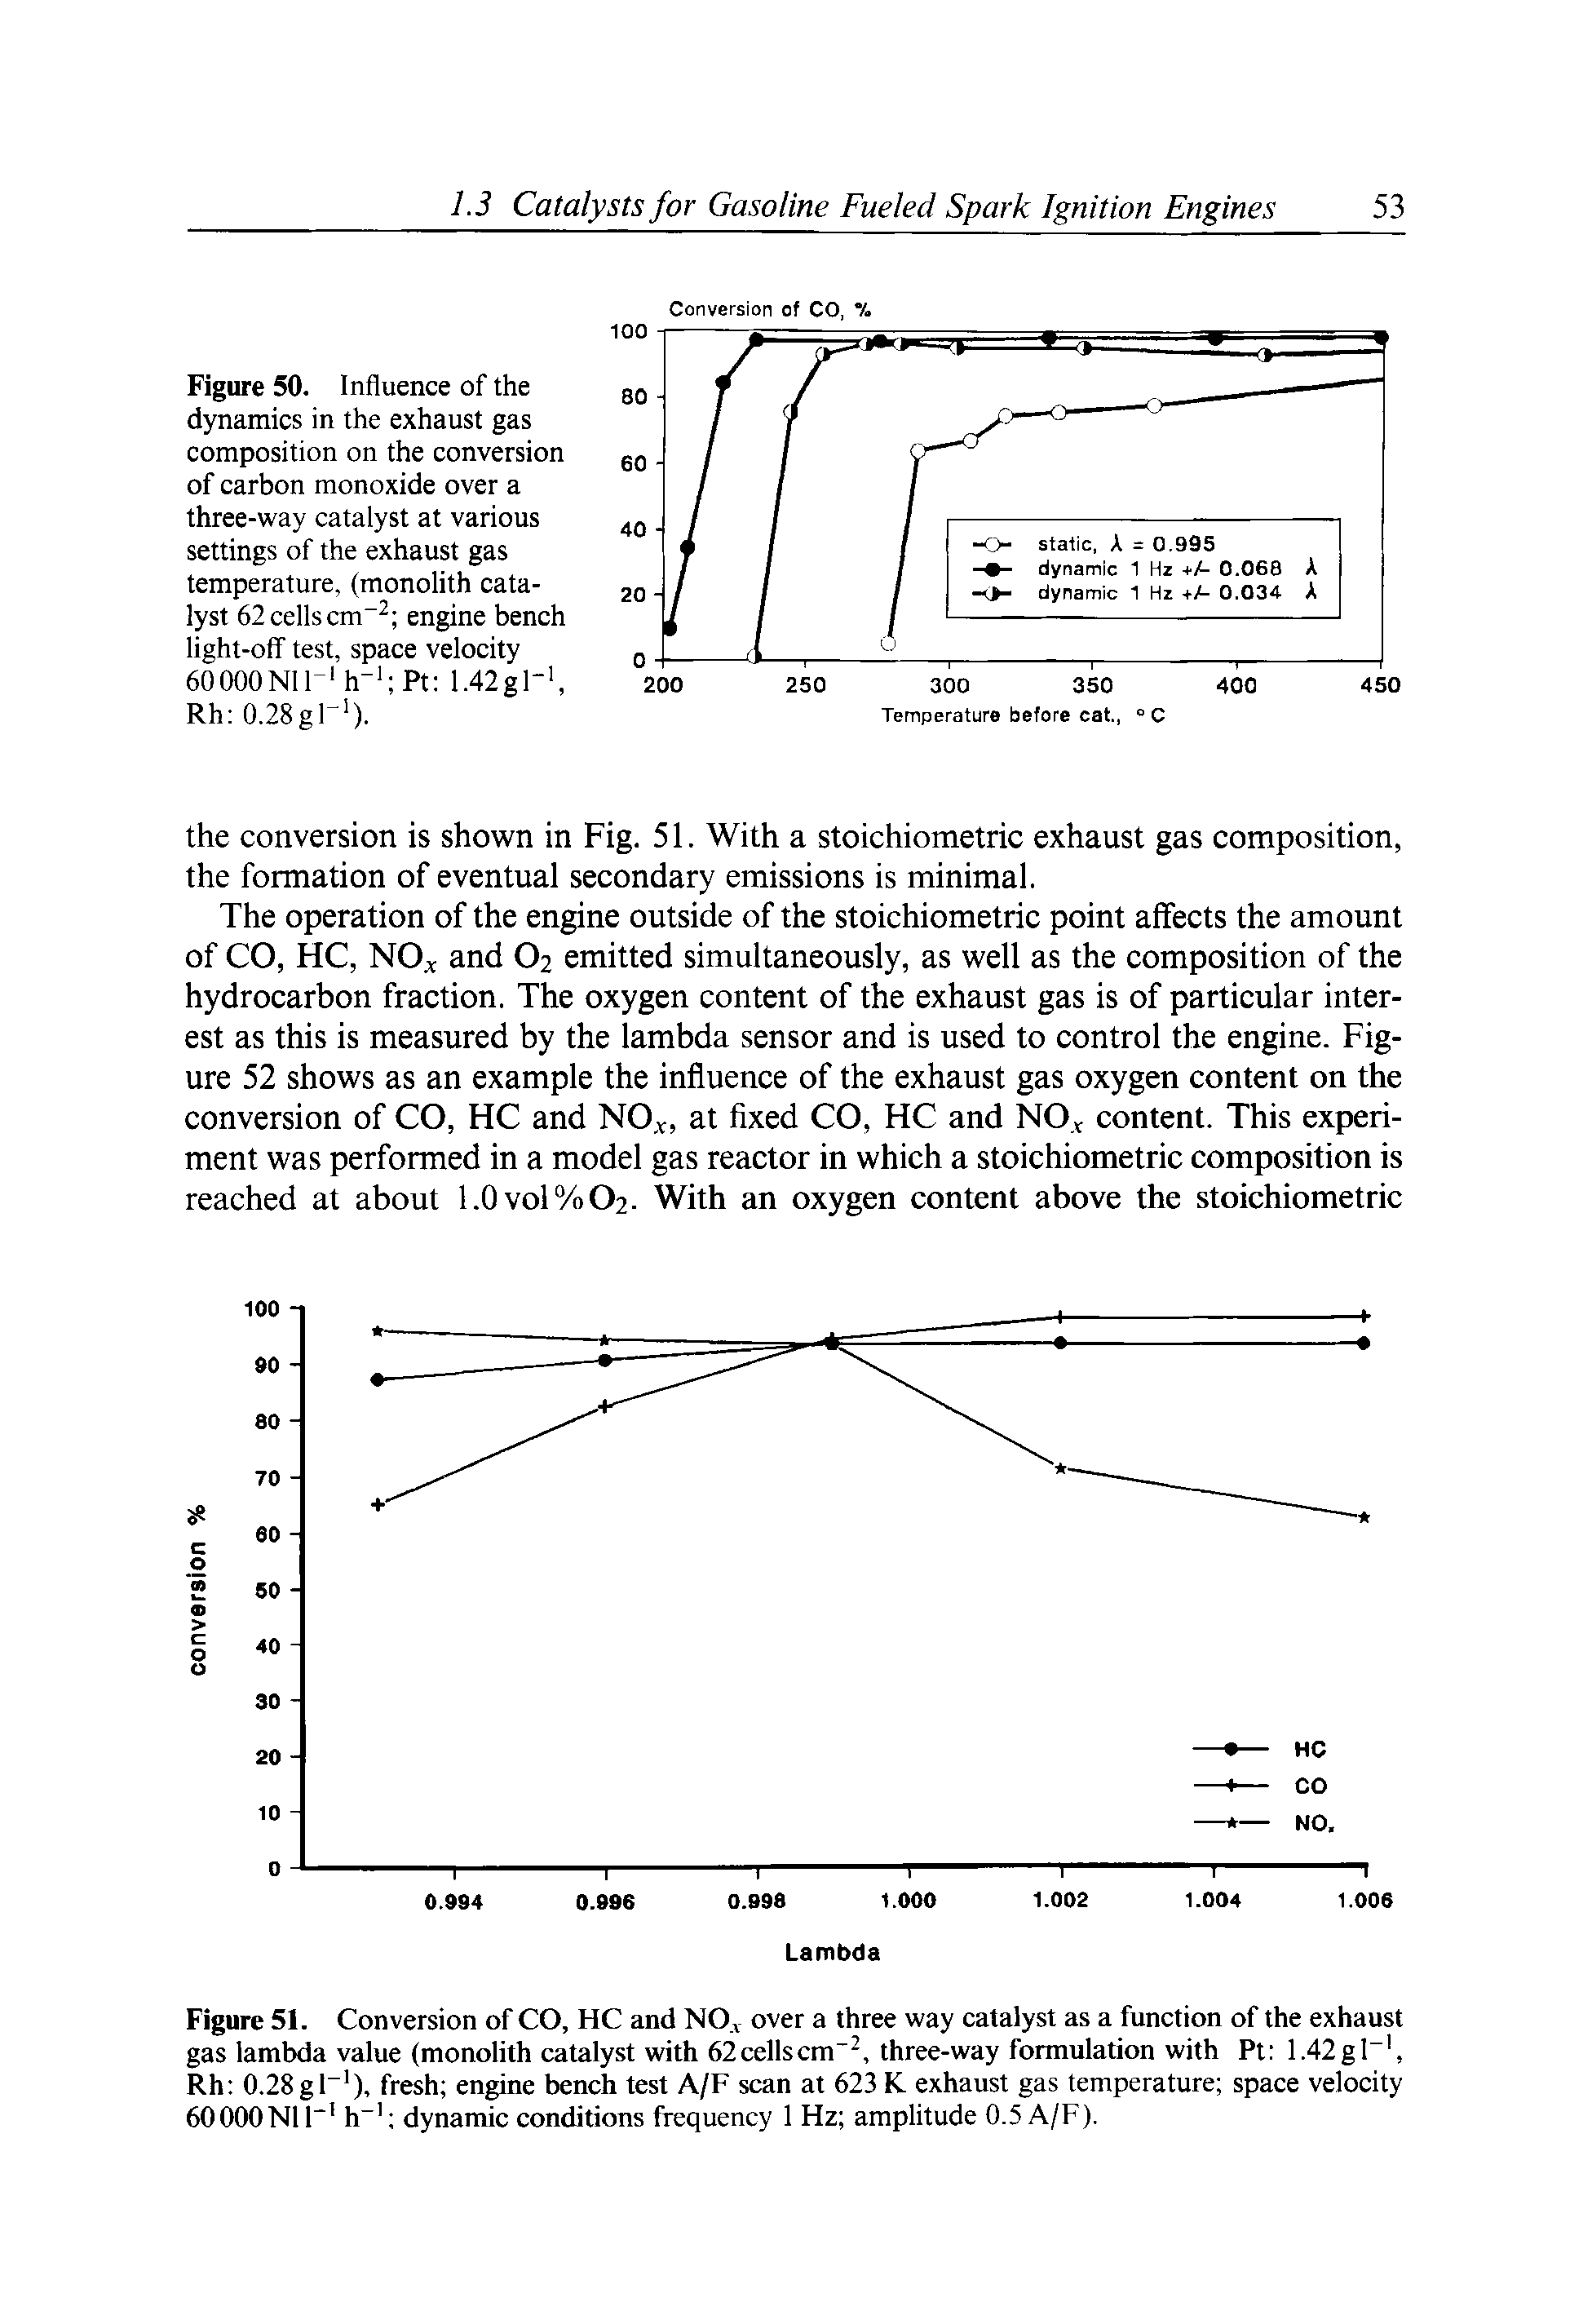 Figure 50. Influence of the dynamics in the exhaust gas composition on the conversion of carbon monoxide over a three-way catalyst at various settings of the exhaust gas temperature, (monolith catalyst 62 cells cm engine bench light-off test, space velocity 60000Nll- h- Pt 1.42gr>, Rh 0.28gr ).